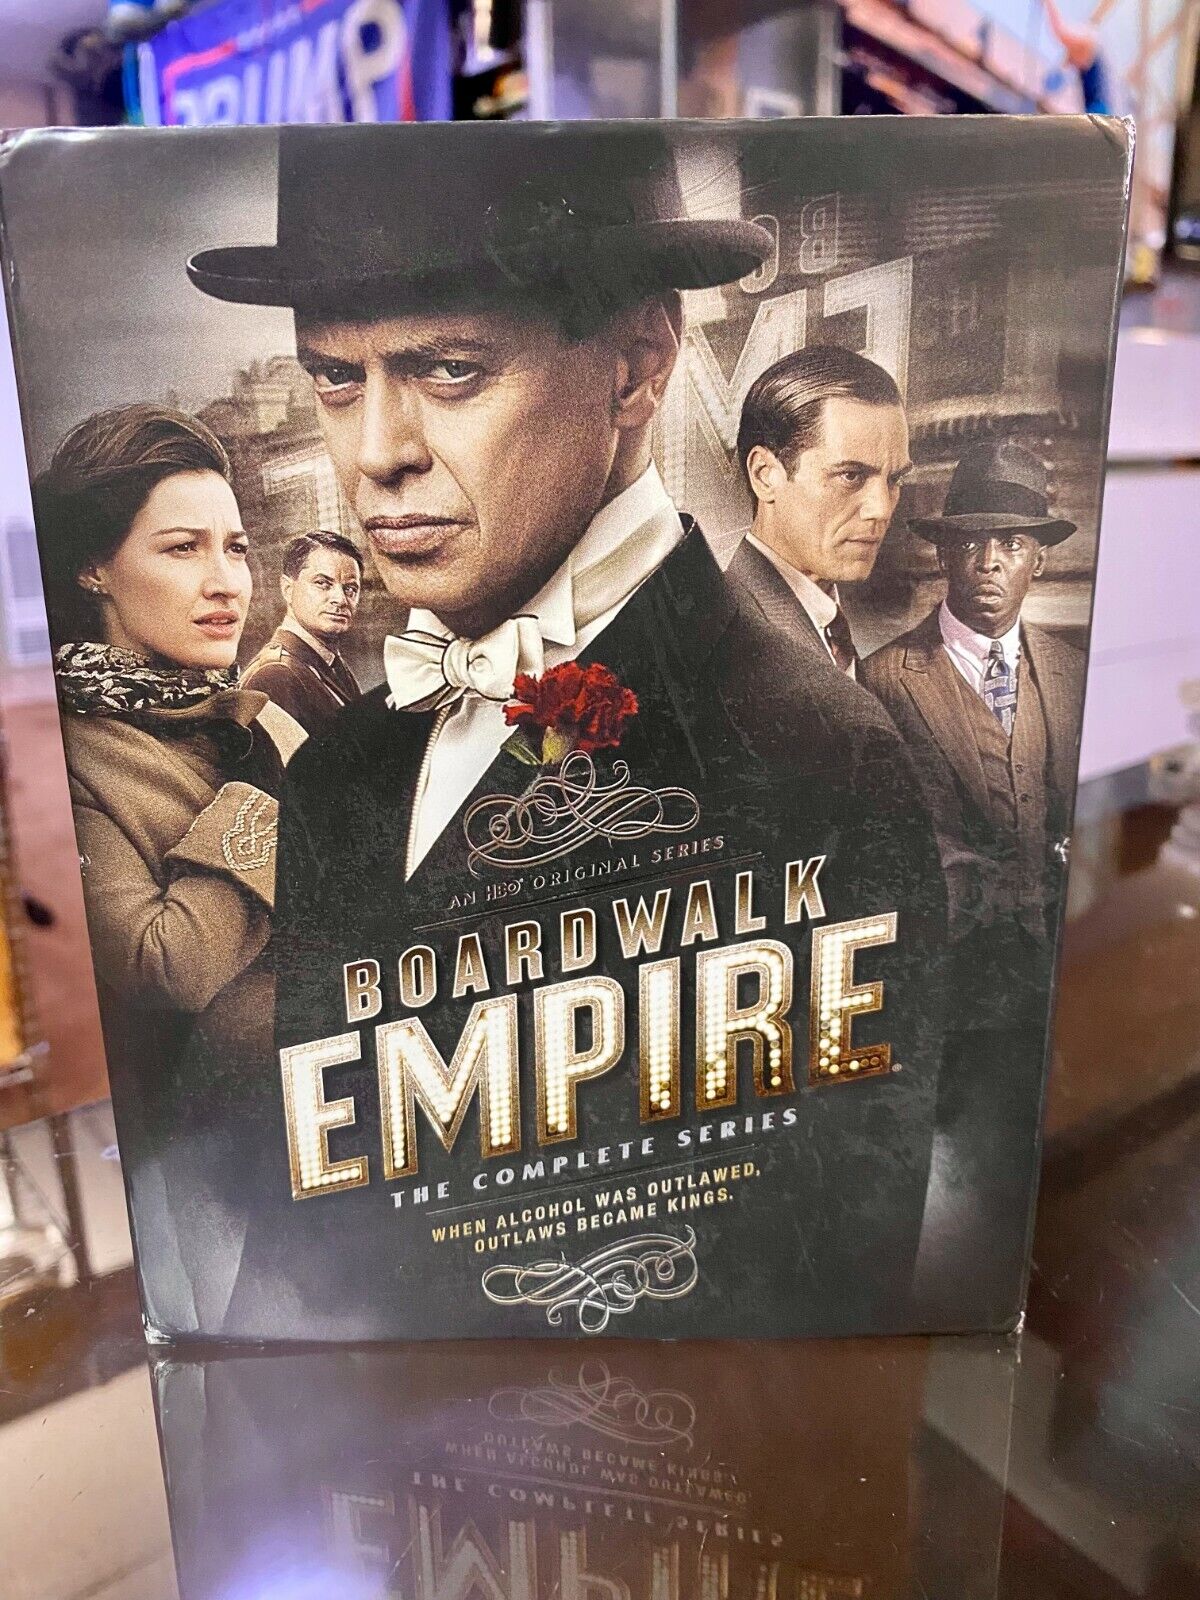 NEW OPENED Boardwalk Empire: The Complete Series ON Blu-ray  - NO DIGITAL COPY Nowy regularny sklep